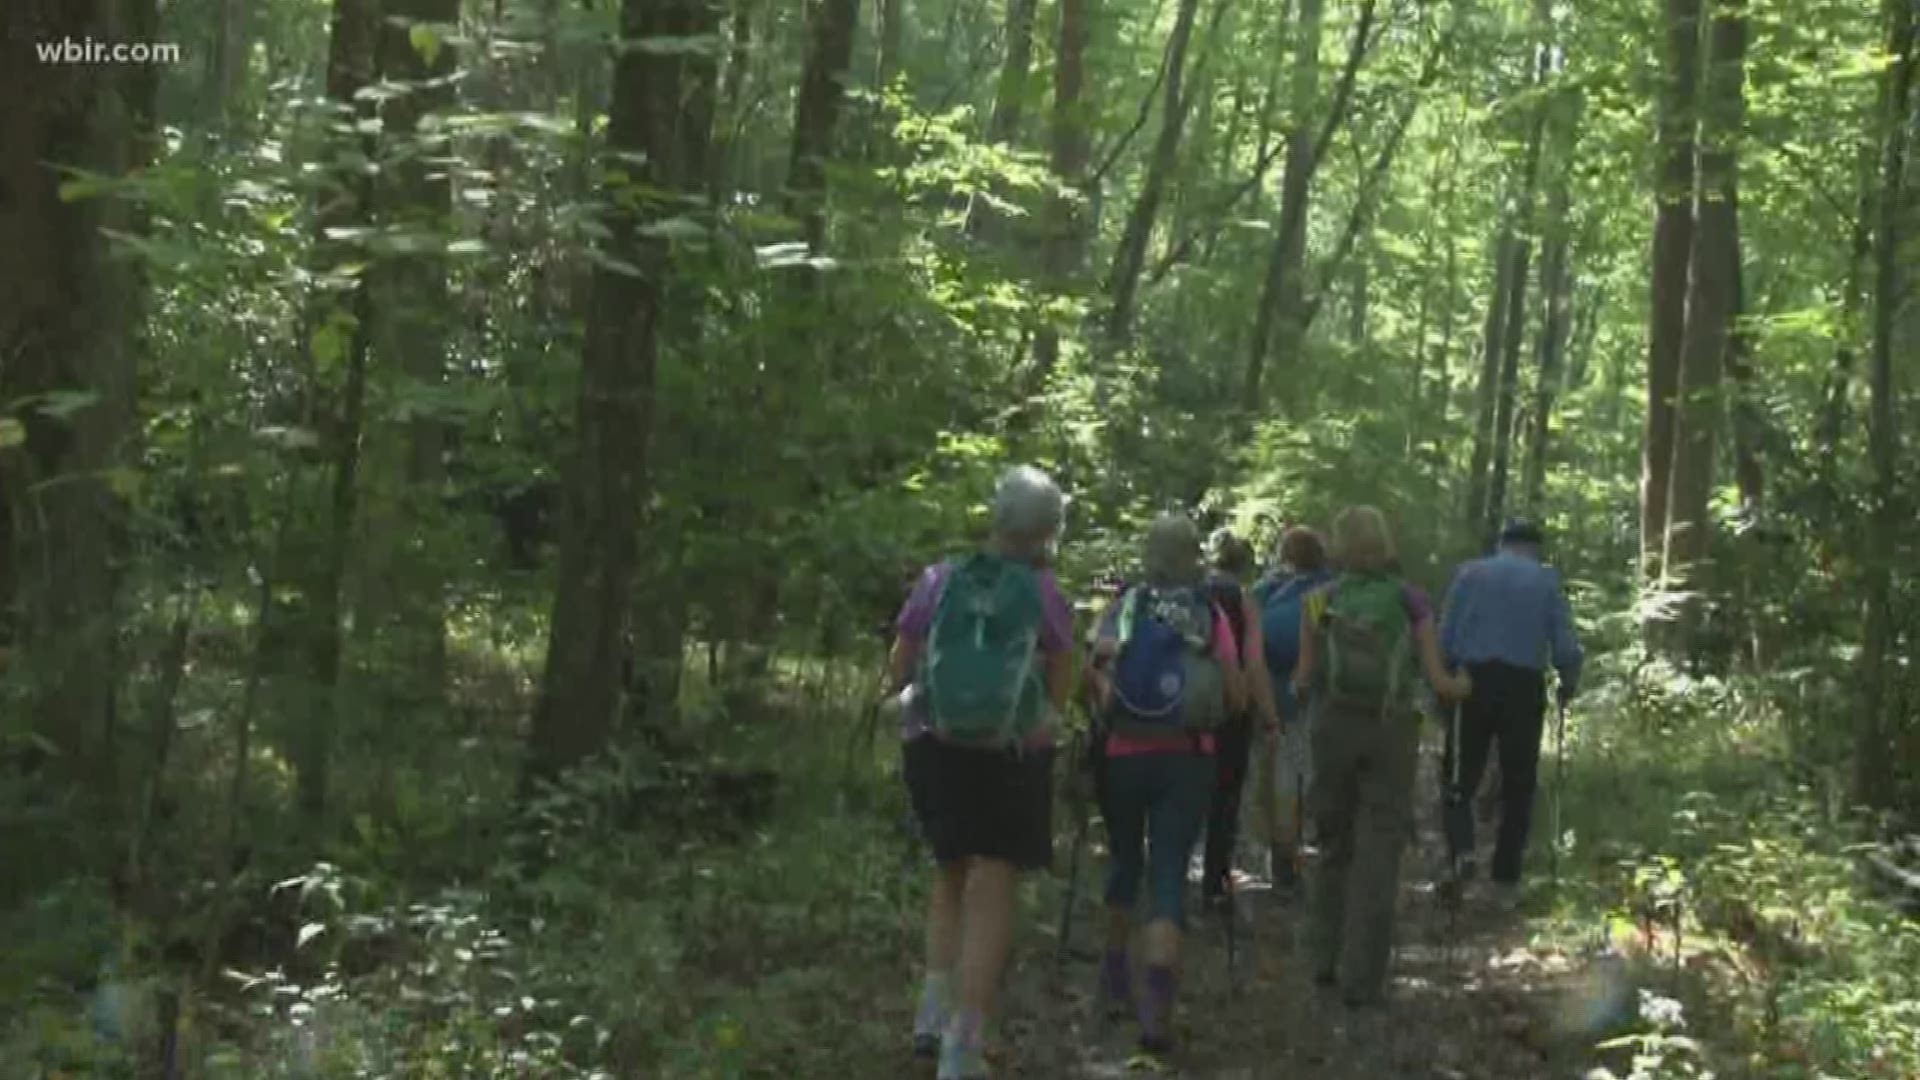 A group of women spend time in the mountains to mend the pains of breast cancer and grow their friendship.